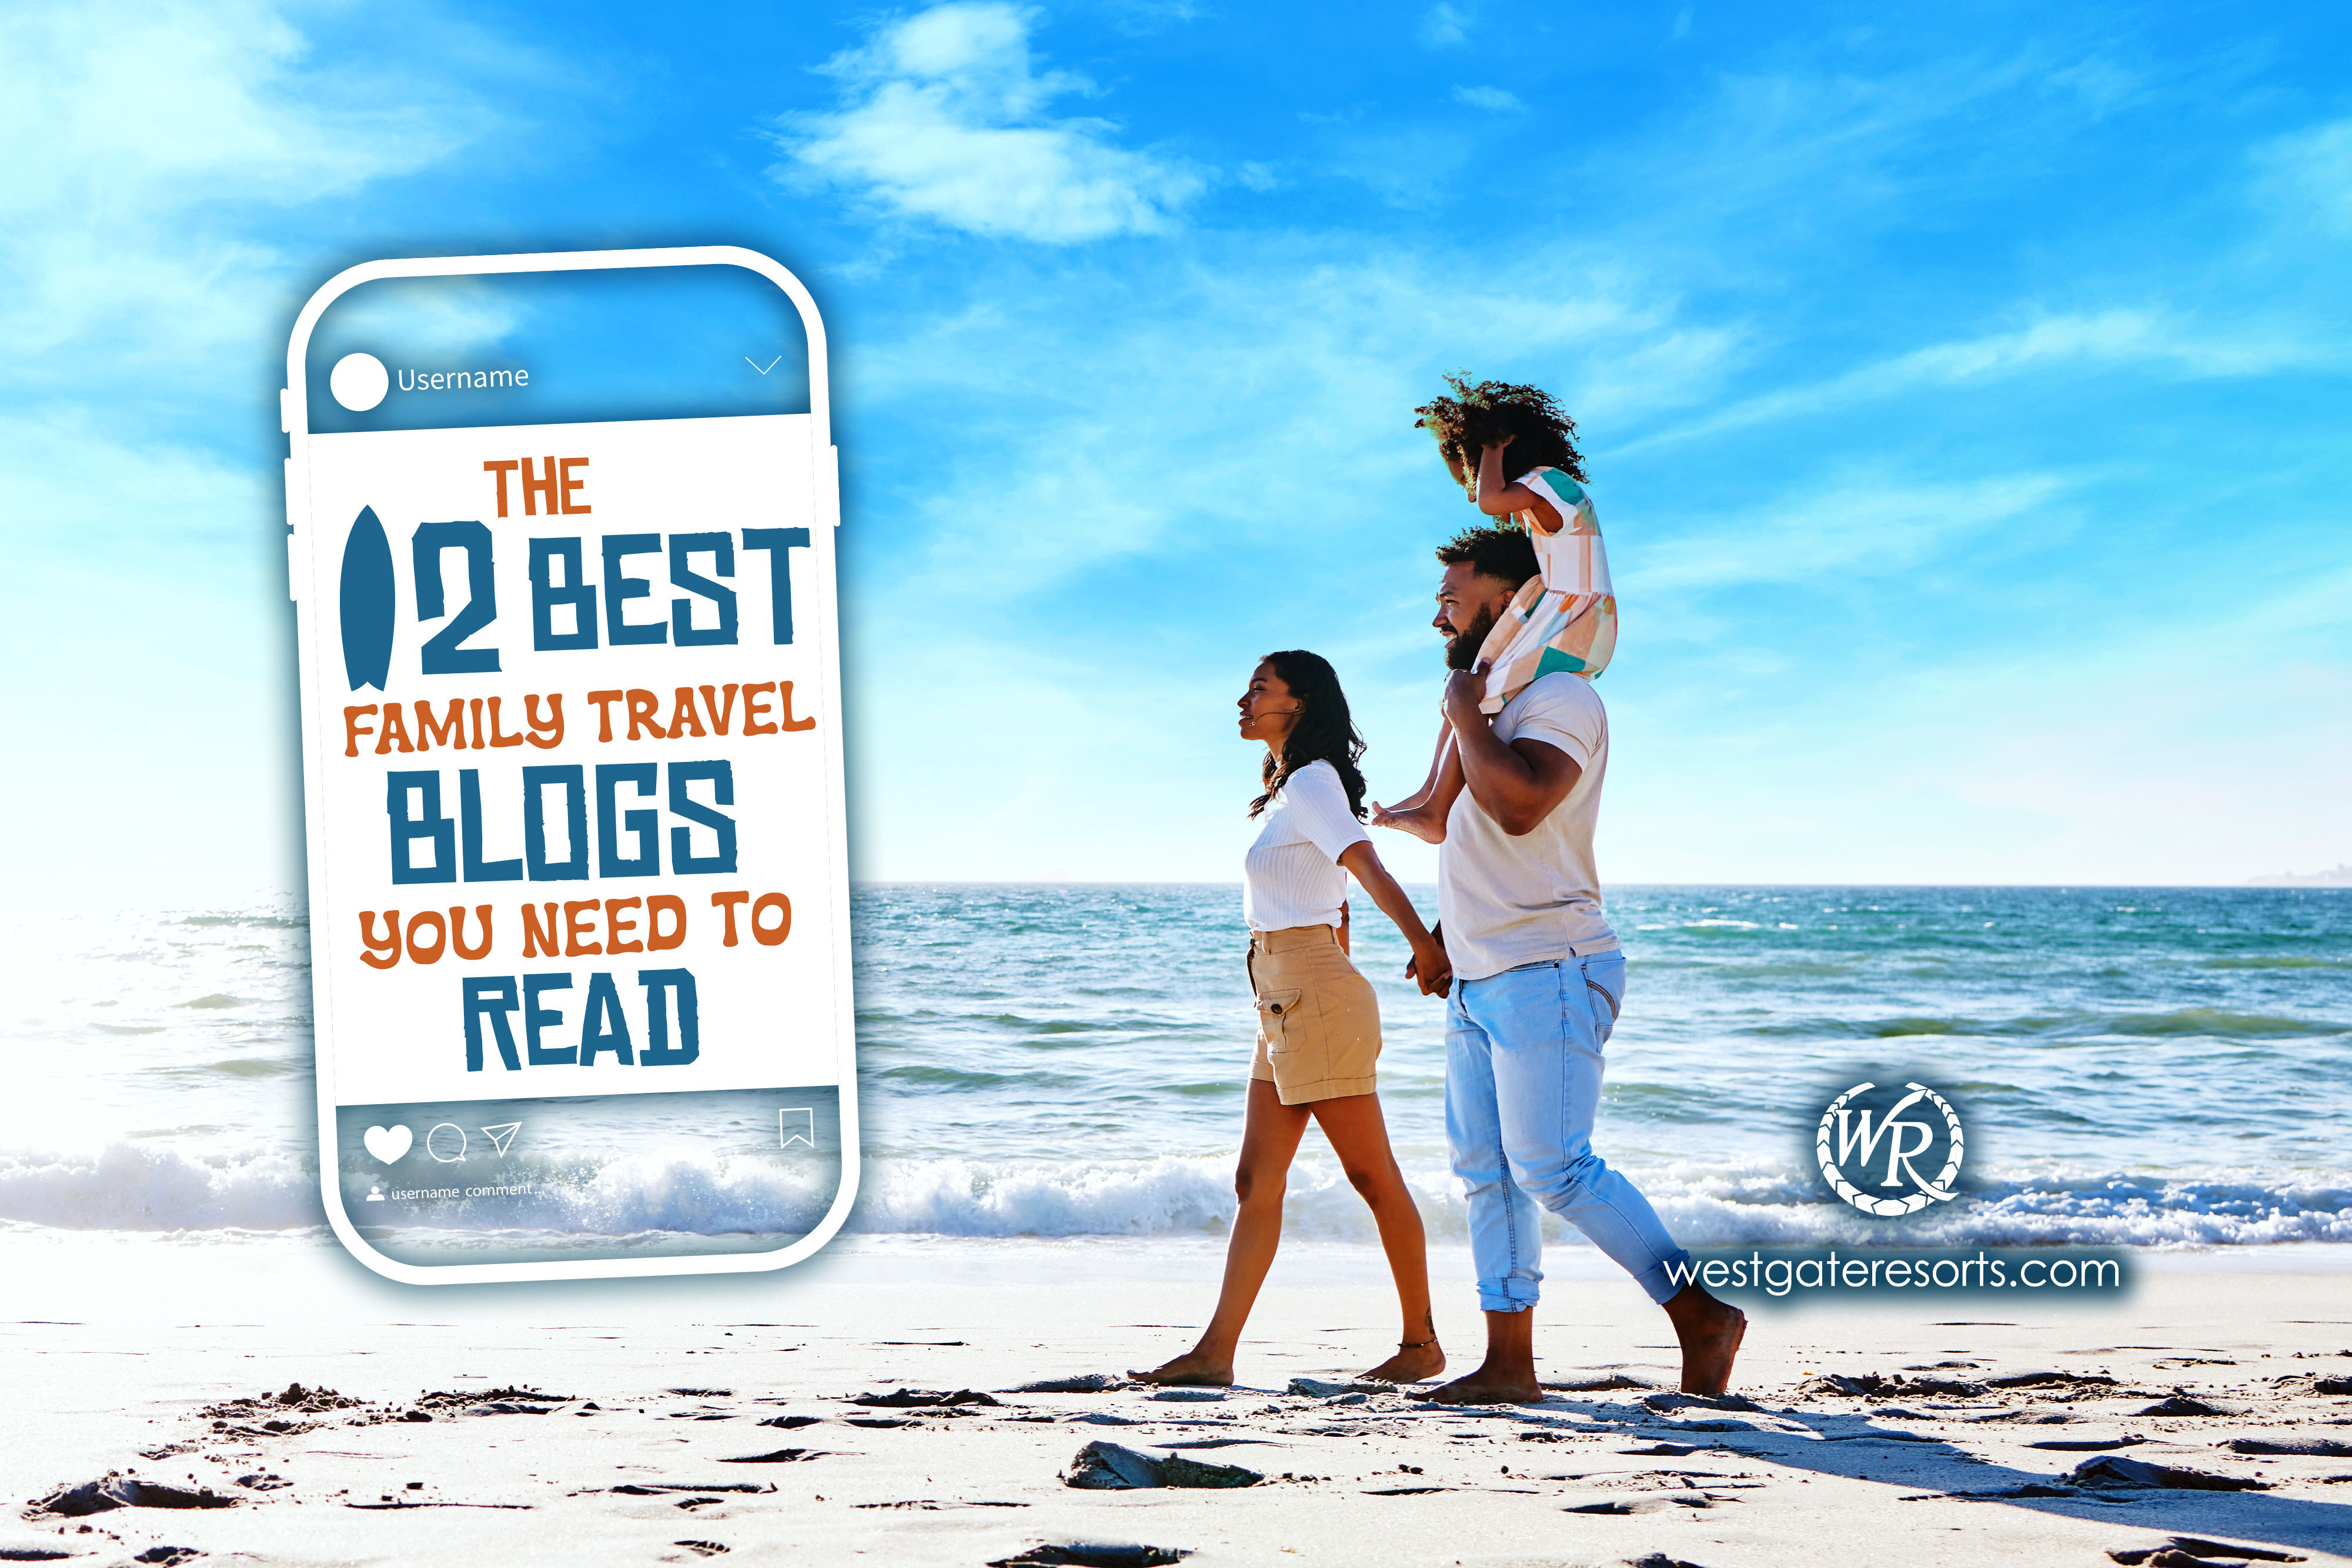 The 12 Best Family Travel Blogs You Need to Read